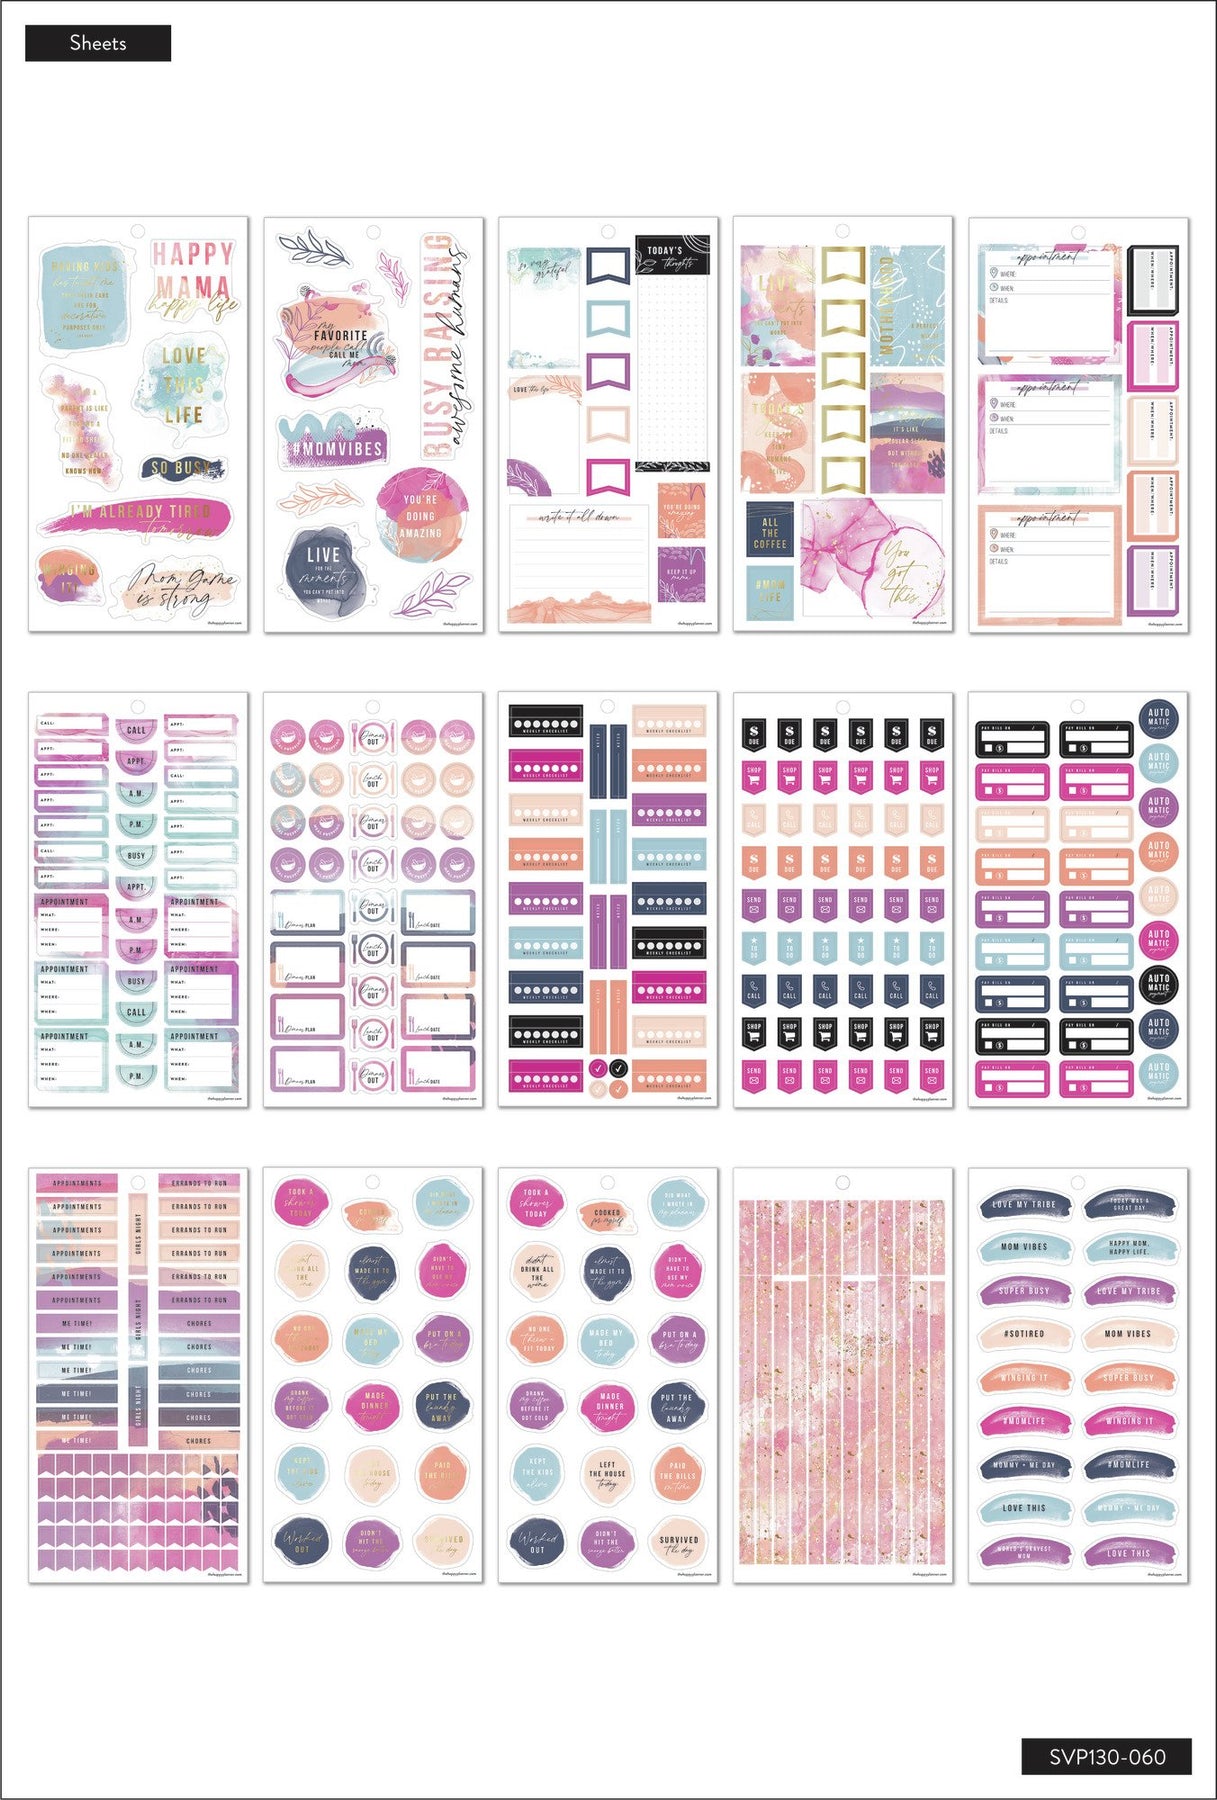 Waxing stickers for planners, ID 0038 – mamagloriashop